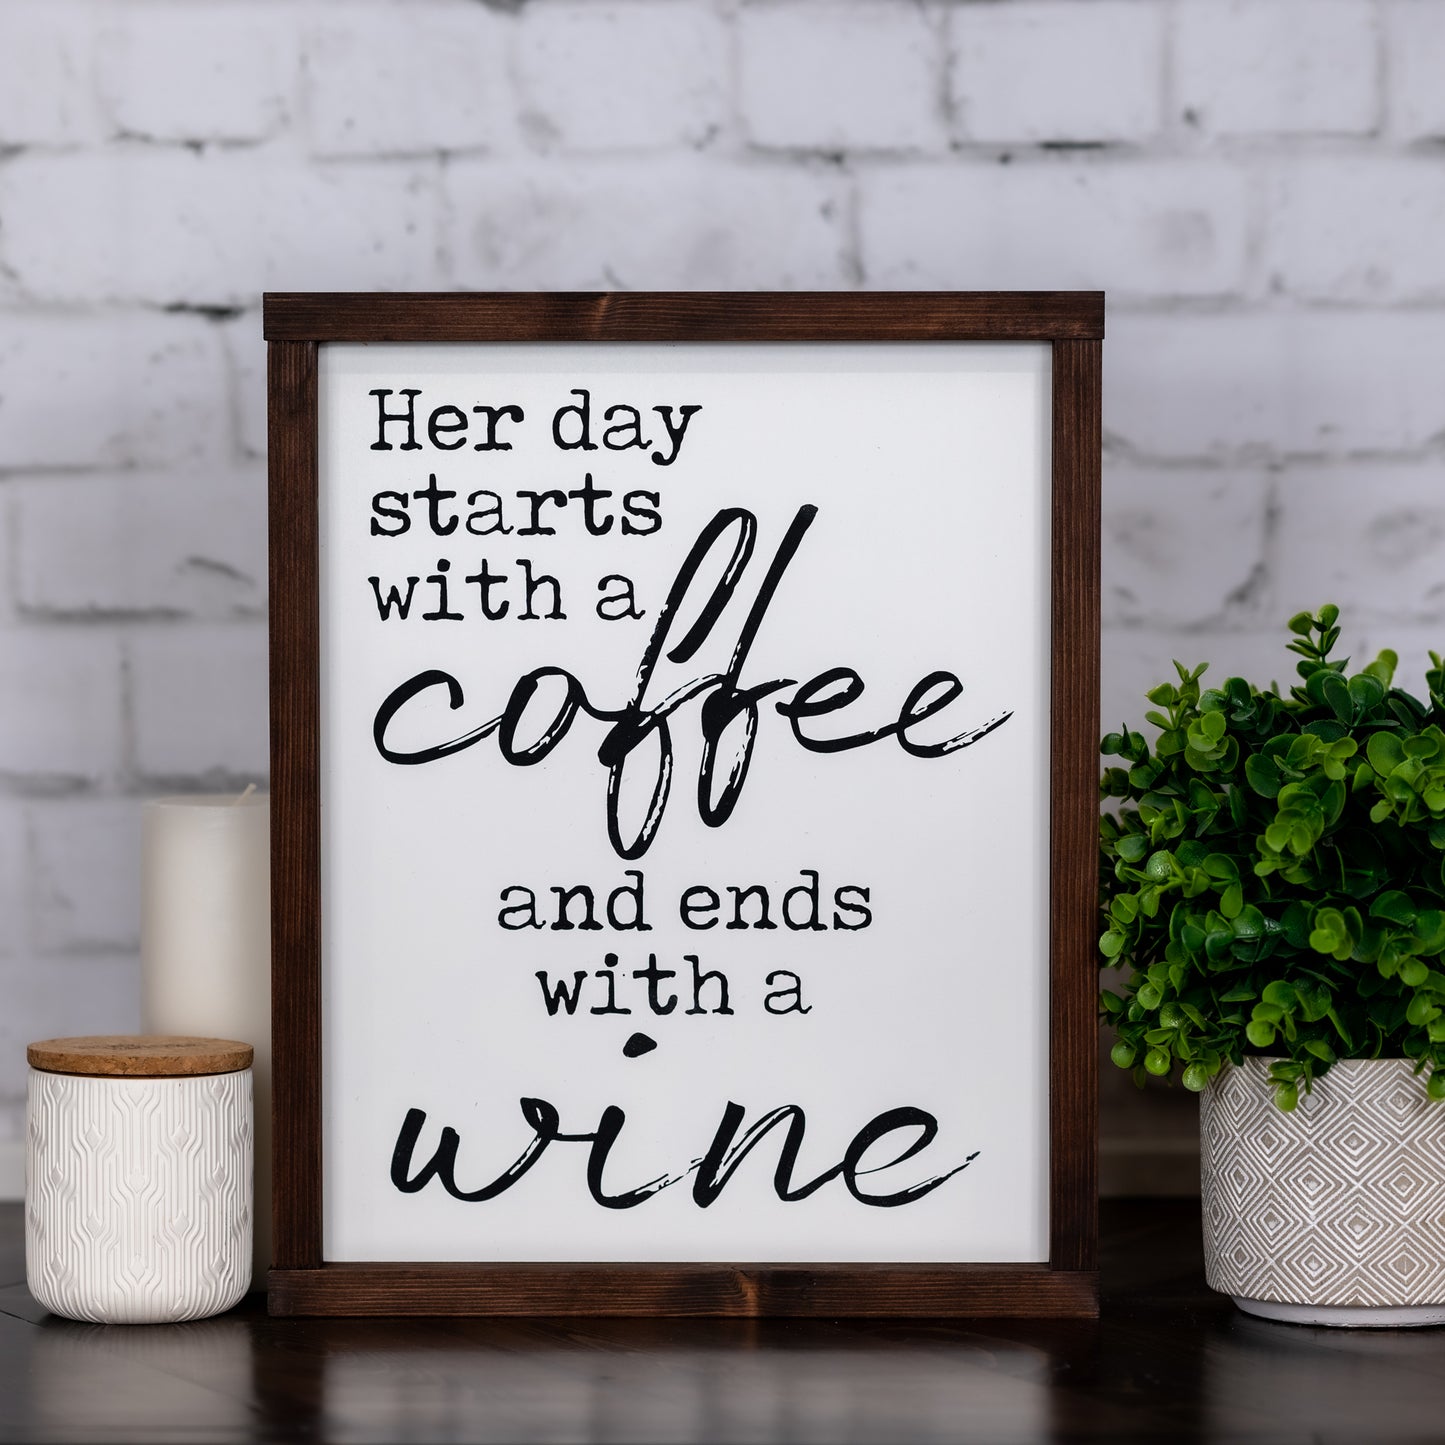 her day starts with a coffee and ends with a wine ~ wood sign